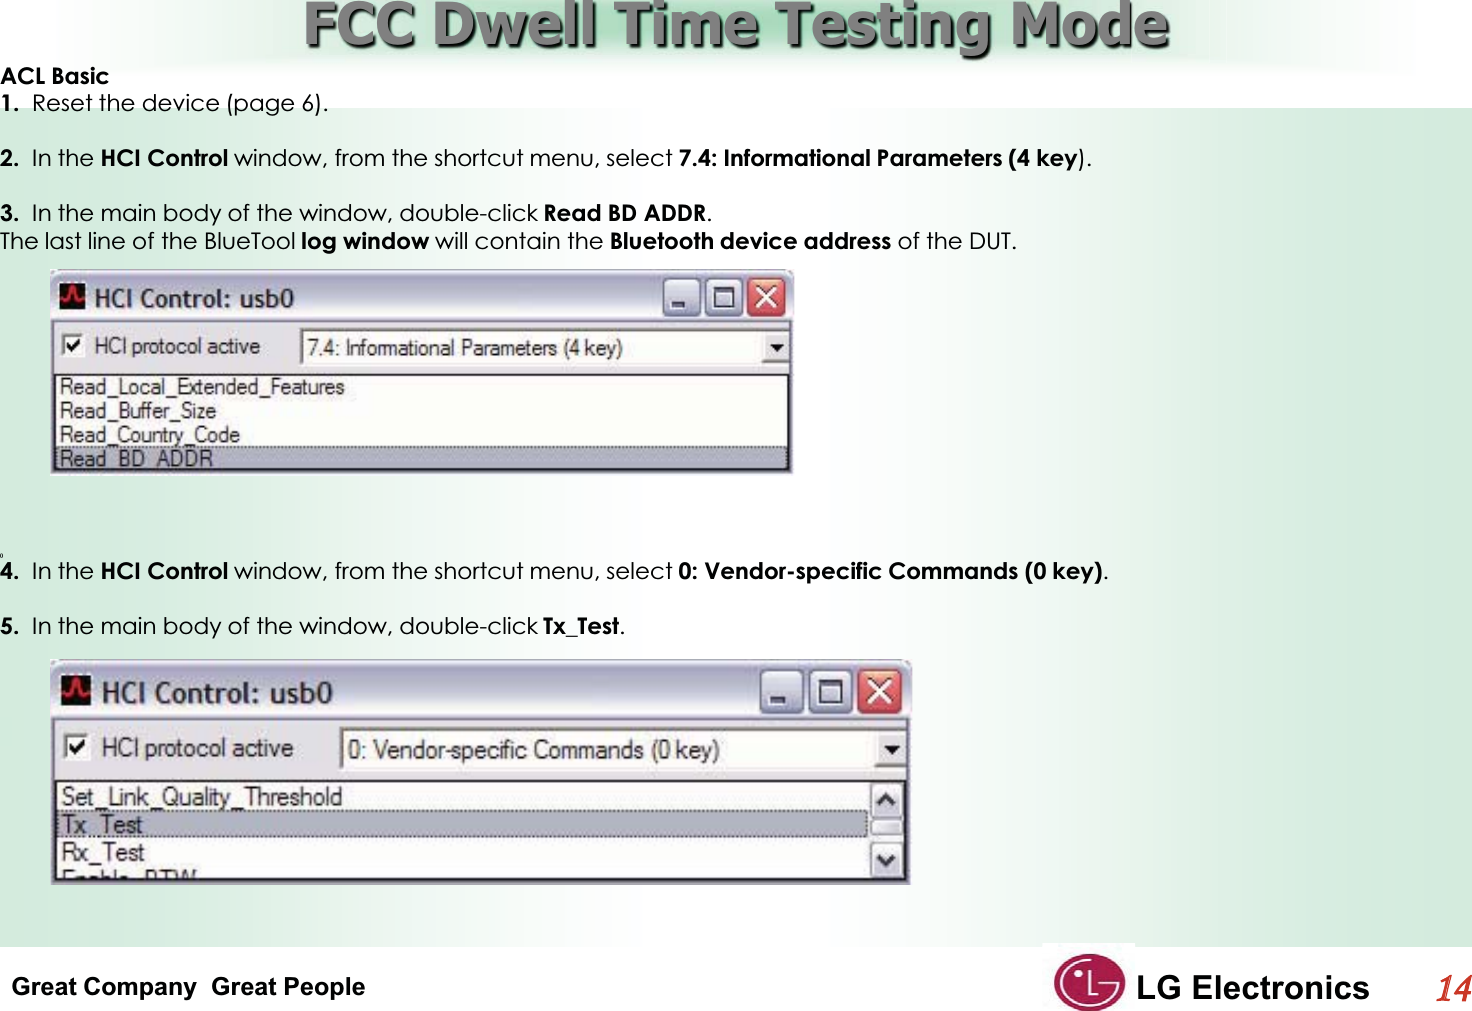 Great Company  Great People LG Electronics114  FCC Dwell Time Testing ModeGACL Basic1.  Reset the device (page 6).2.  In the HCI Control window, from the shortcut menu, select 7.4: Informational Parameters (4 key).3.  In the main body of the window, double-click Read BD ADDR.The last line of the BlueTool log window will contain the Bluetooth device address of the DUT.4.  In the HCI Control window, from the shortcut menu, select 0: Vendor-specific Commands (0 key).5.  In the main body of the window, double-click Tx_Test.GGG()GG